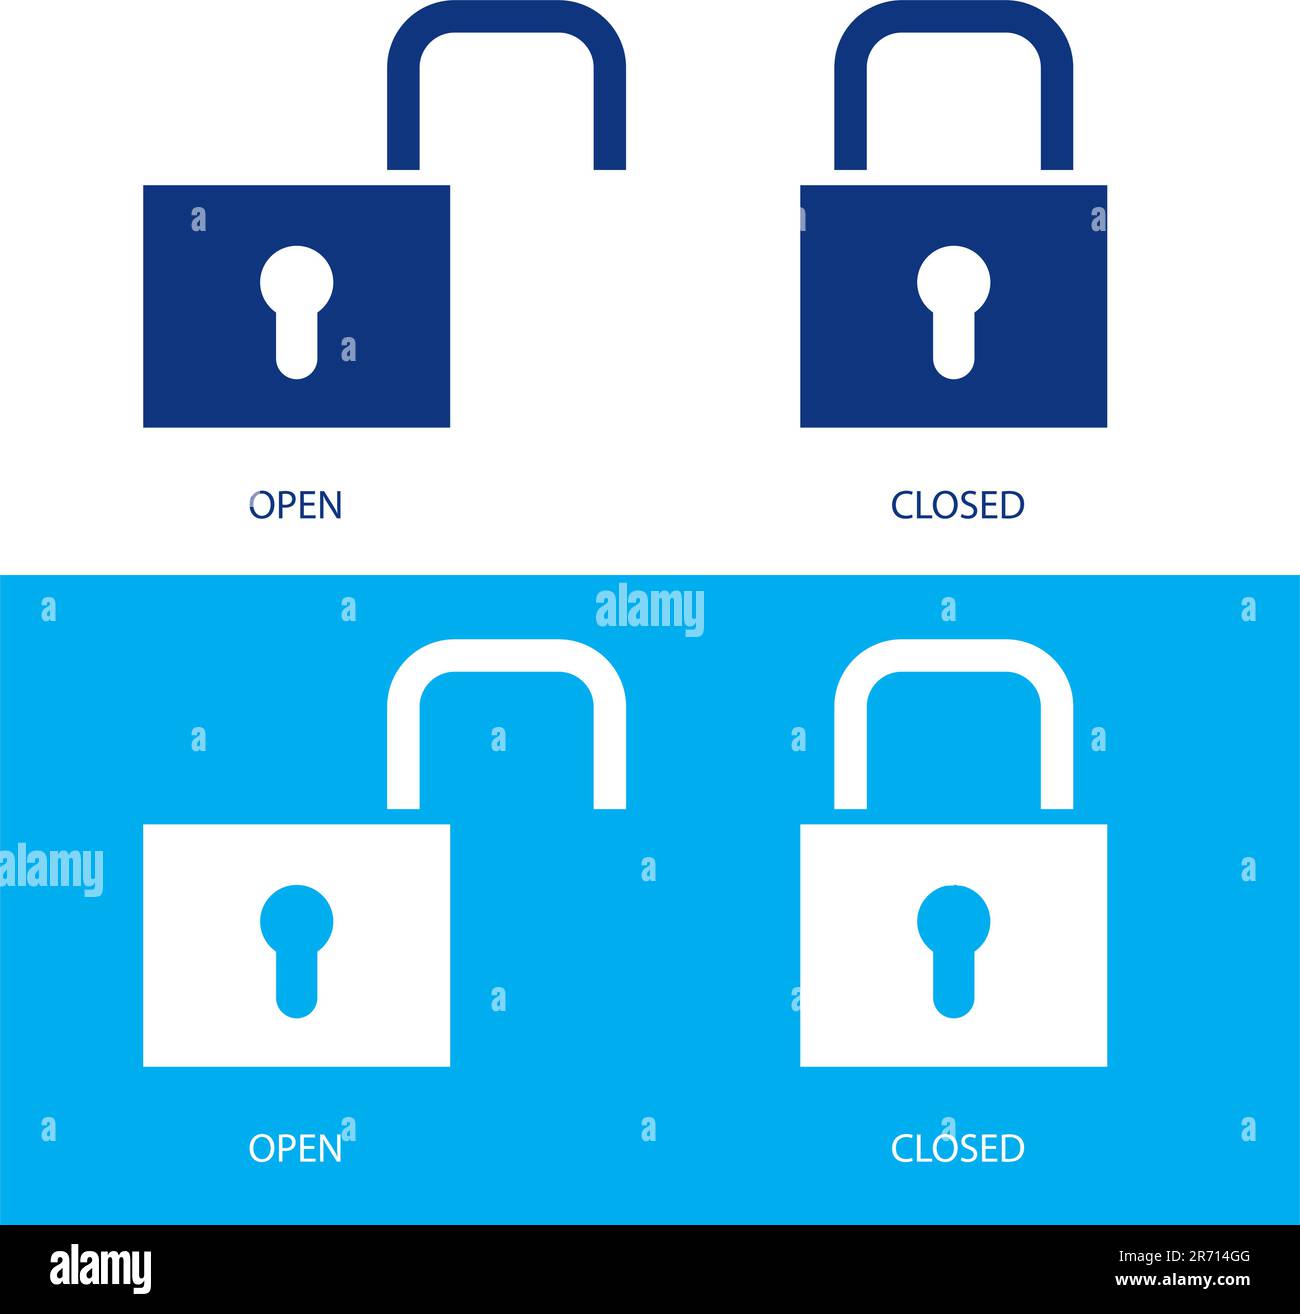 Illustration of padlocks in open and closed positions Stock Vector